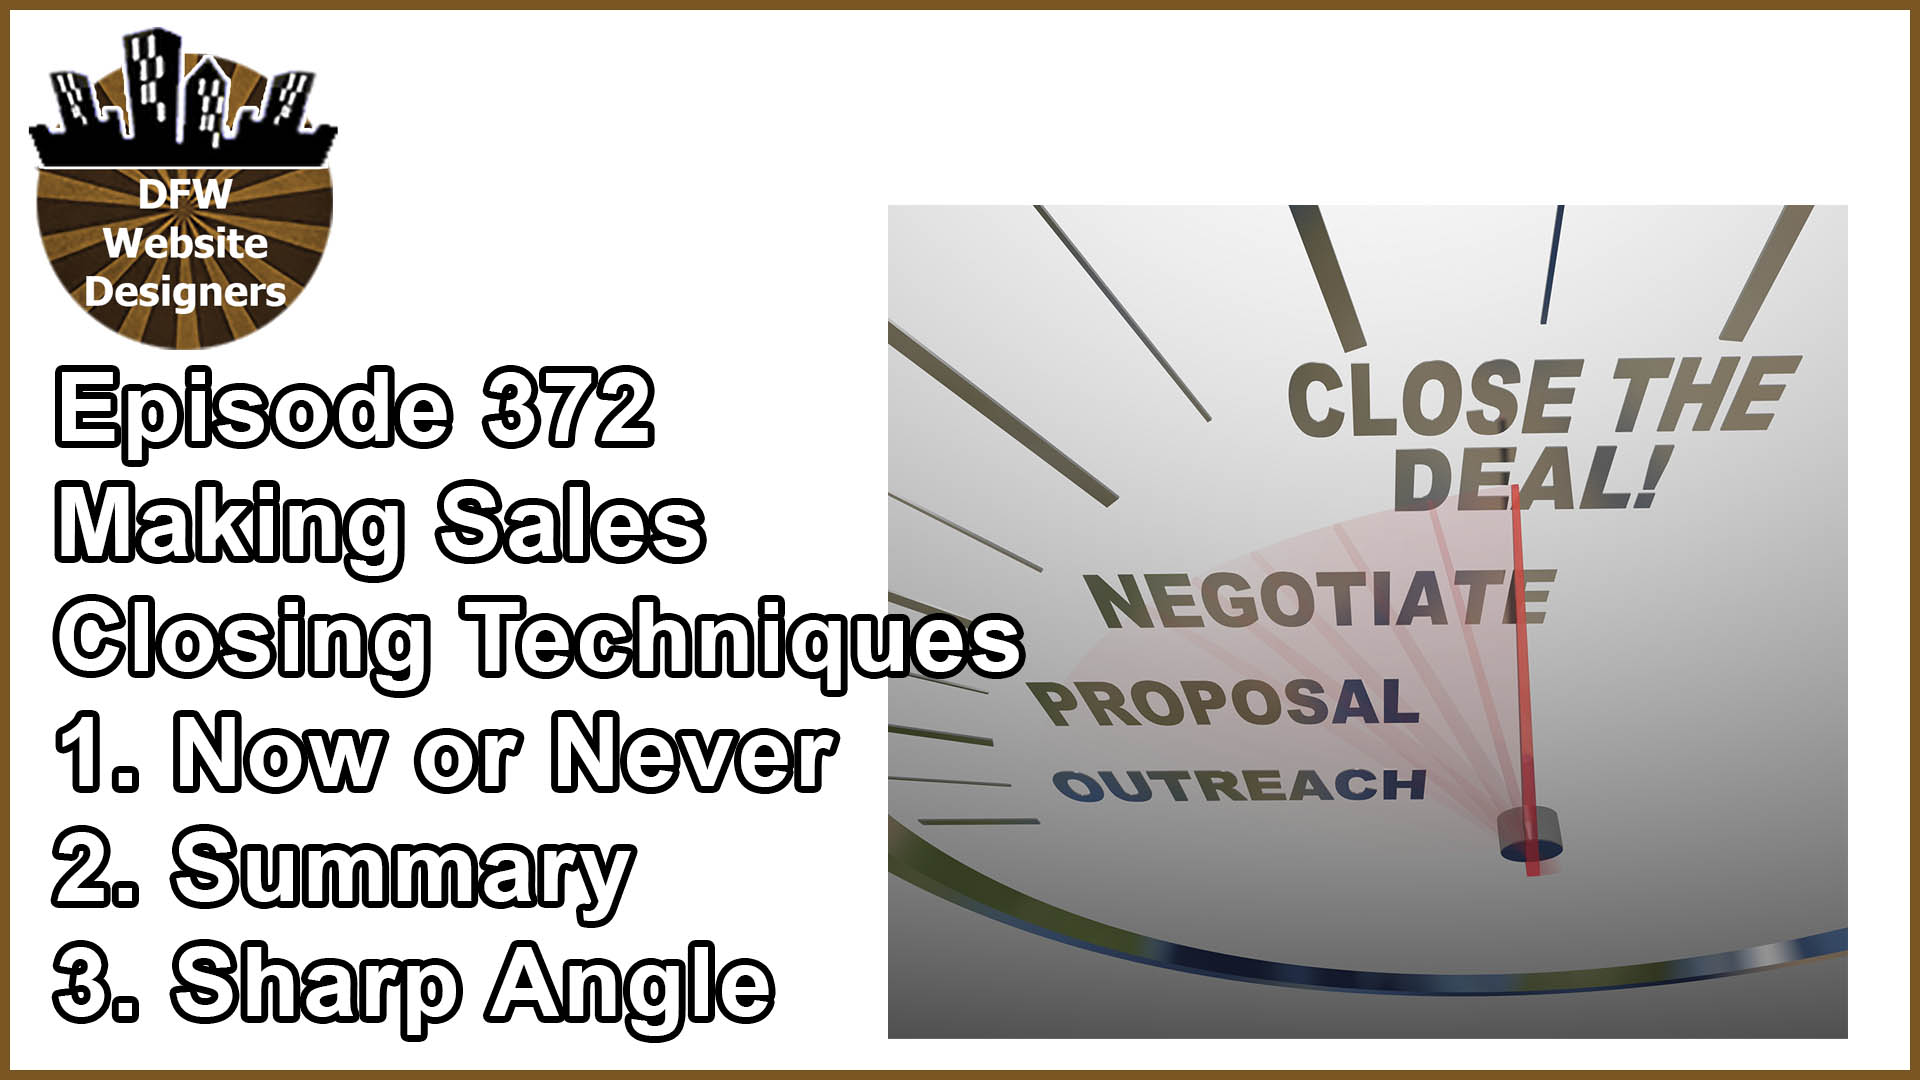 Episode 372 Making Sales Pt5 Closing Techniques: Now/Never, Summary, Sharp Angle